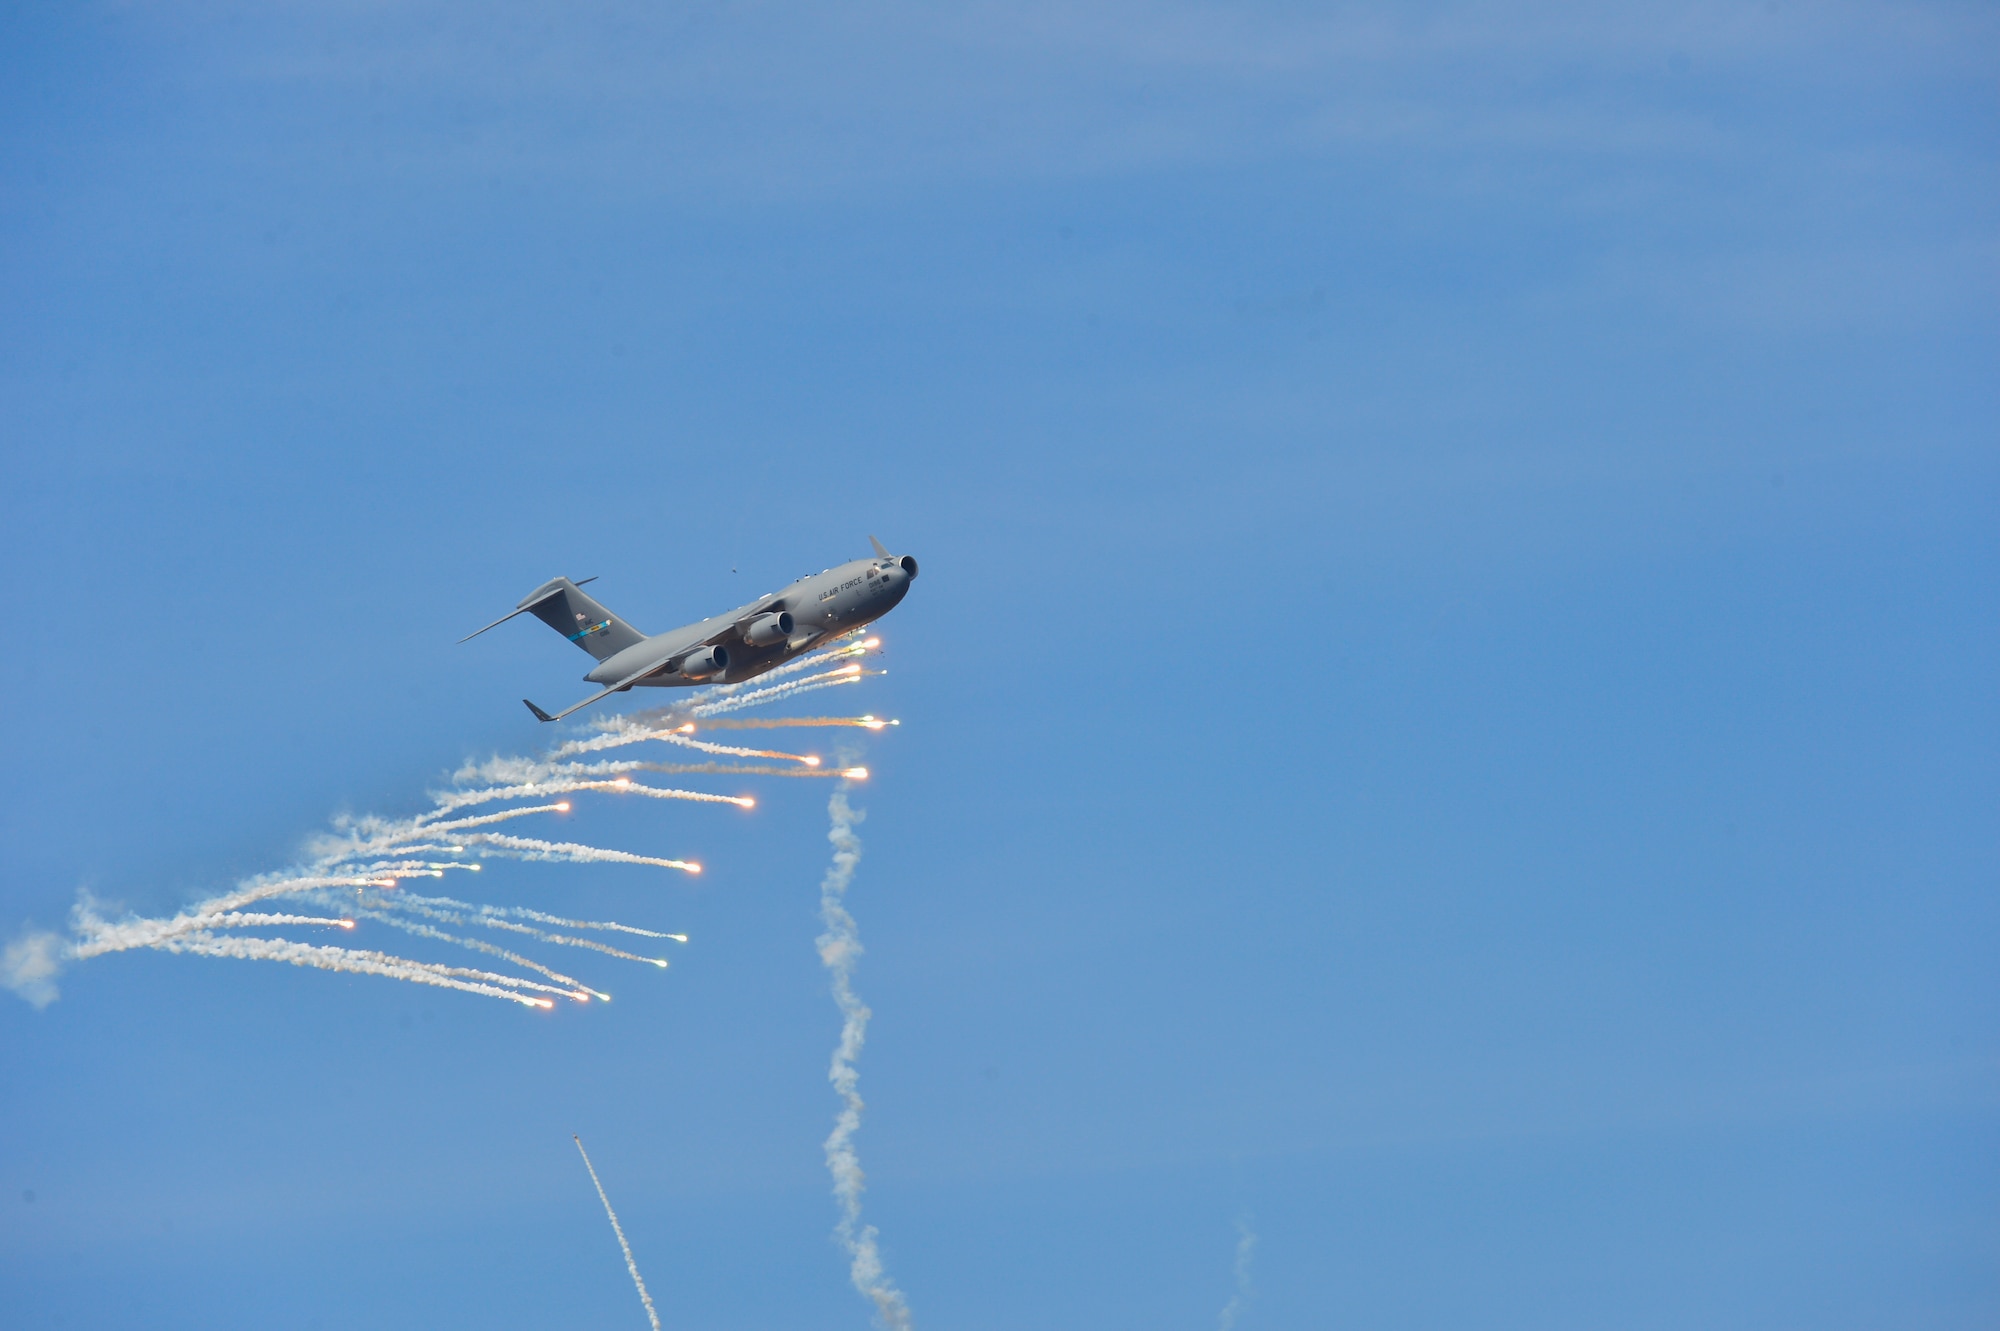 A Dover C-17A Globemaster III expends countermeasure flares to defeat a simulated surface-to-air missile, or smokey SAM, shot from a Man-Portable Aircraft Survivability Trainer system during a training mission March 24, 2016, at the Bollen Live-Fire Range Complex on Fort Indiantown Gap, Pa. A total of 240 flares were expended for the aircraft during the training mission. (U.S. Air Force photo/Senior Airman William Johnson)